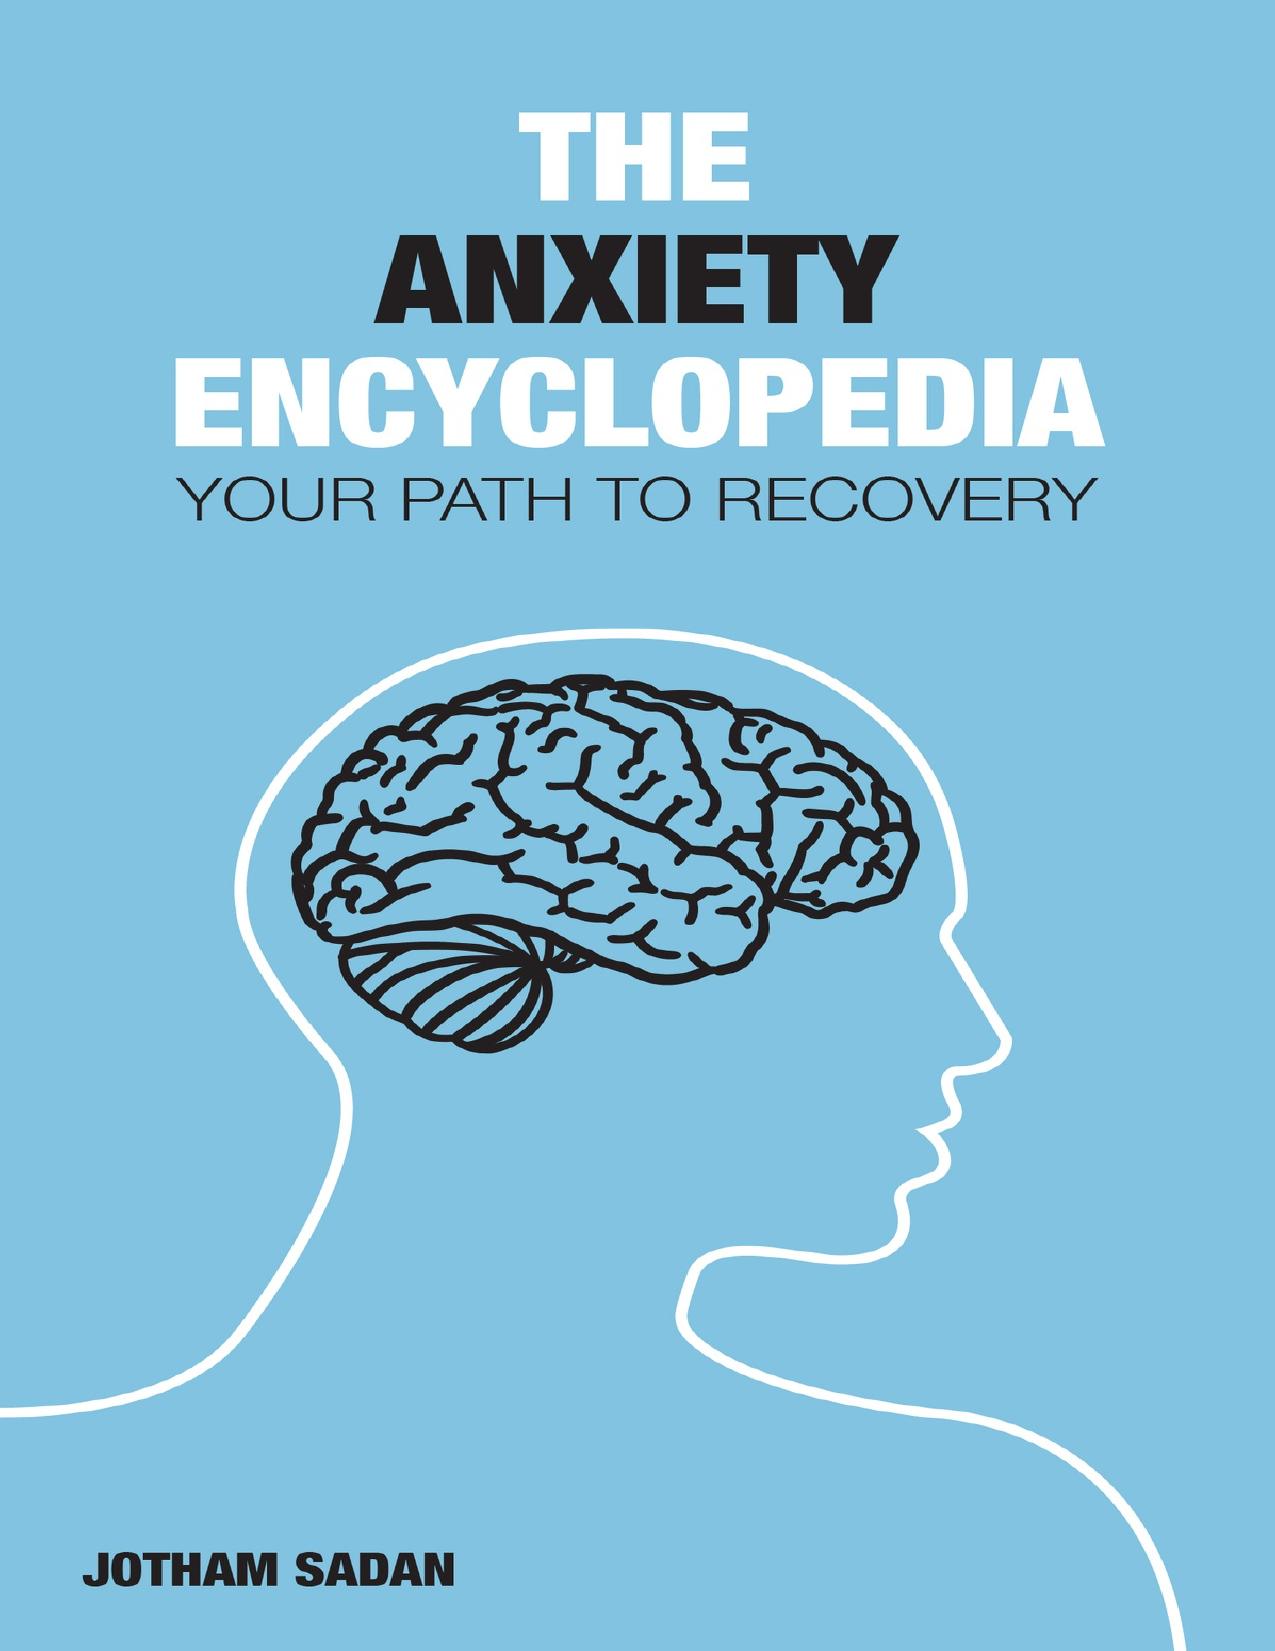 The Anxiety Encyclopedia: Your Path to Recovery by Sadan Jotham